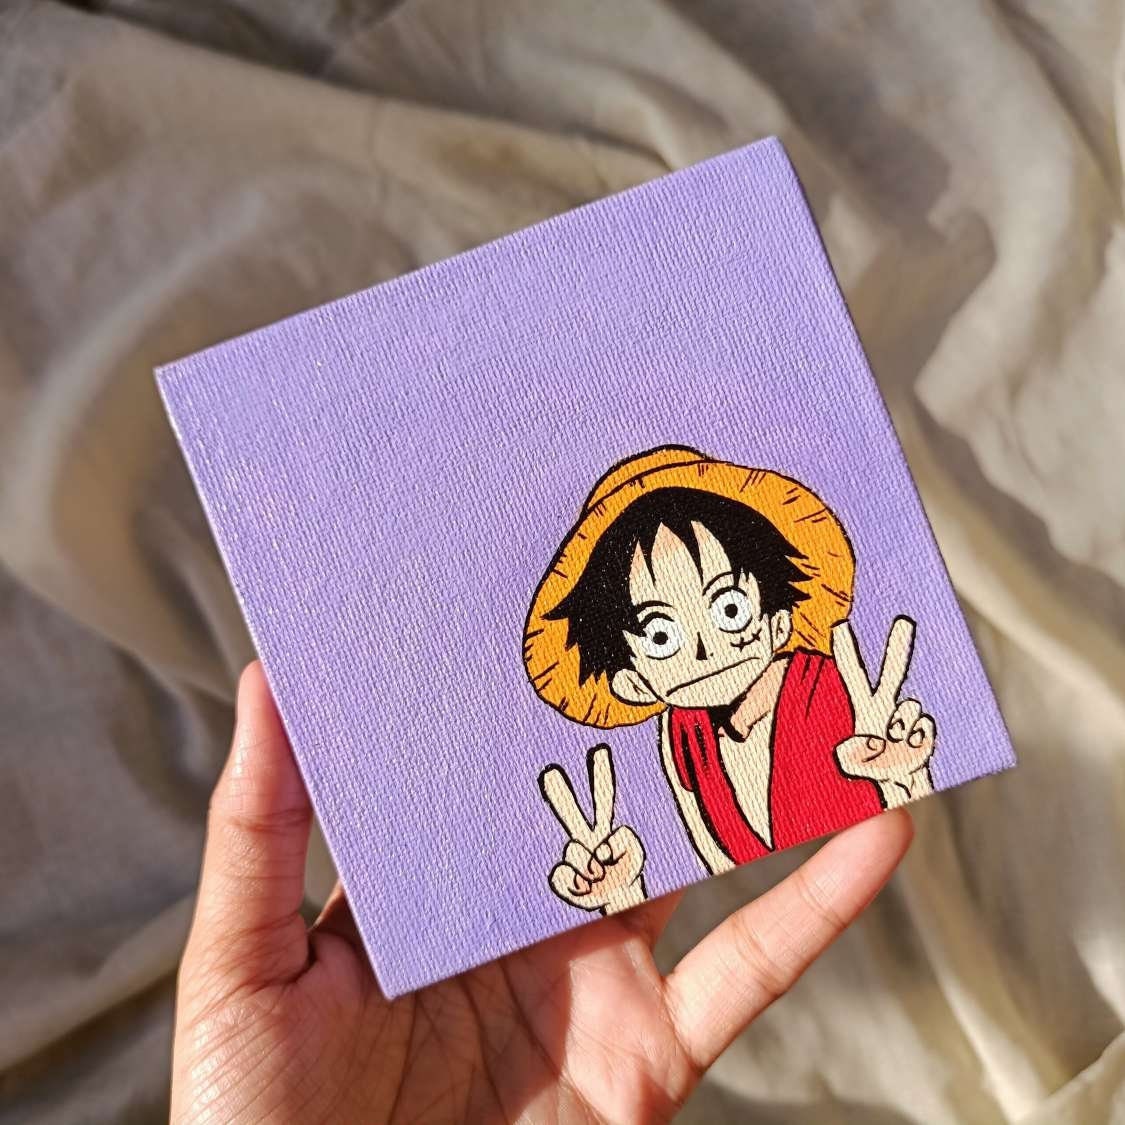 New One Piece Luffy Nika Four Emperors 3 Billion Bounty Order Retro Poster  Sticker Bedroom Decoration Pirate Wanted Paintings